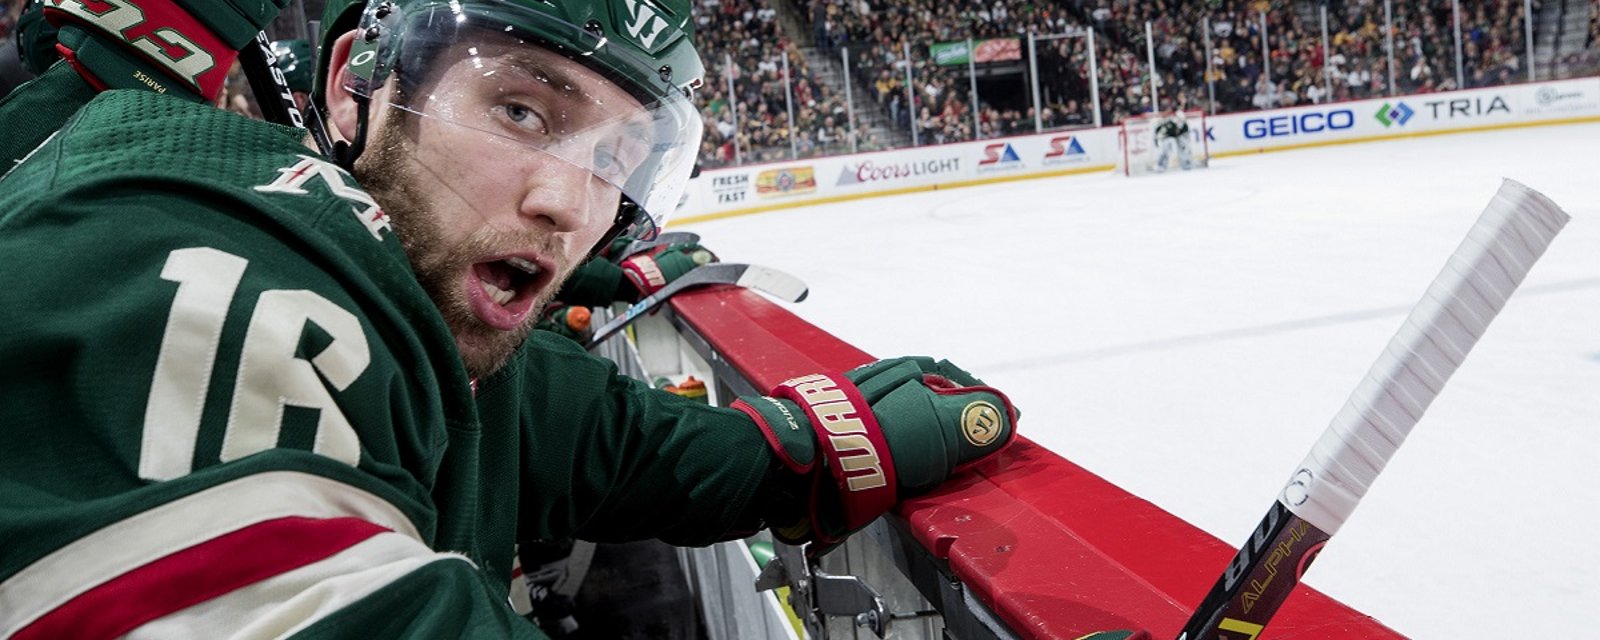 Wild down two key players ahead of revenge match against the Flames.